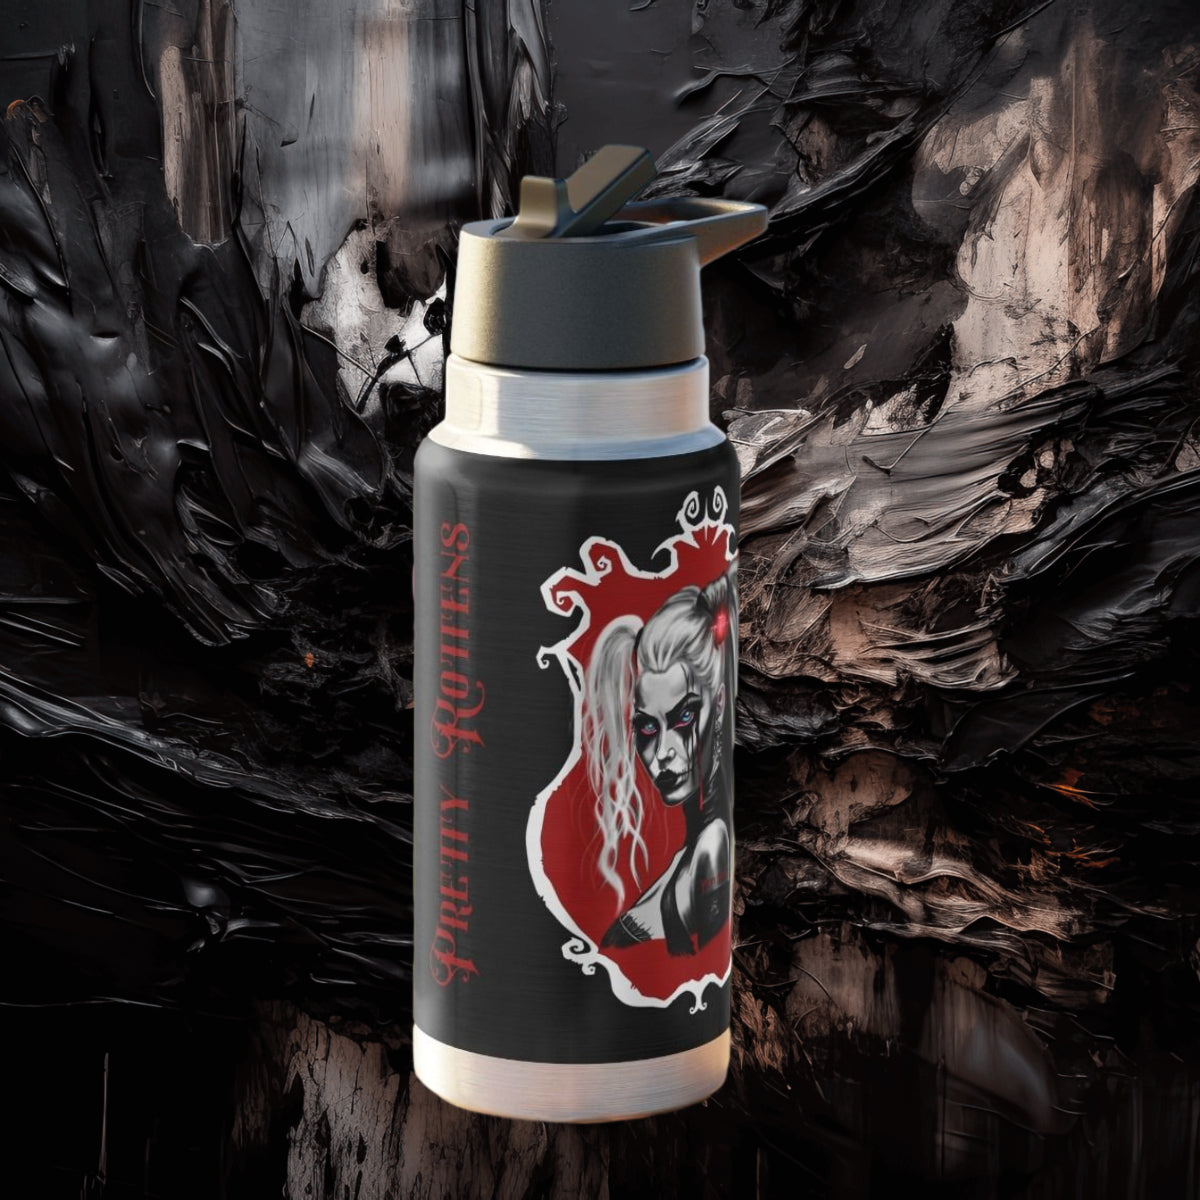 Alternative/Gothic Black and Red "Pretty Zombie" Design Personalized Water Bottle 32oz